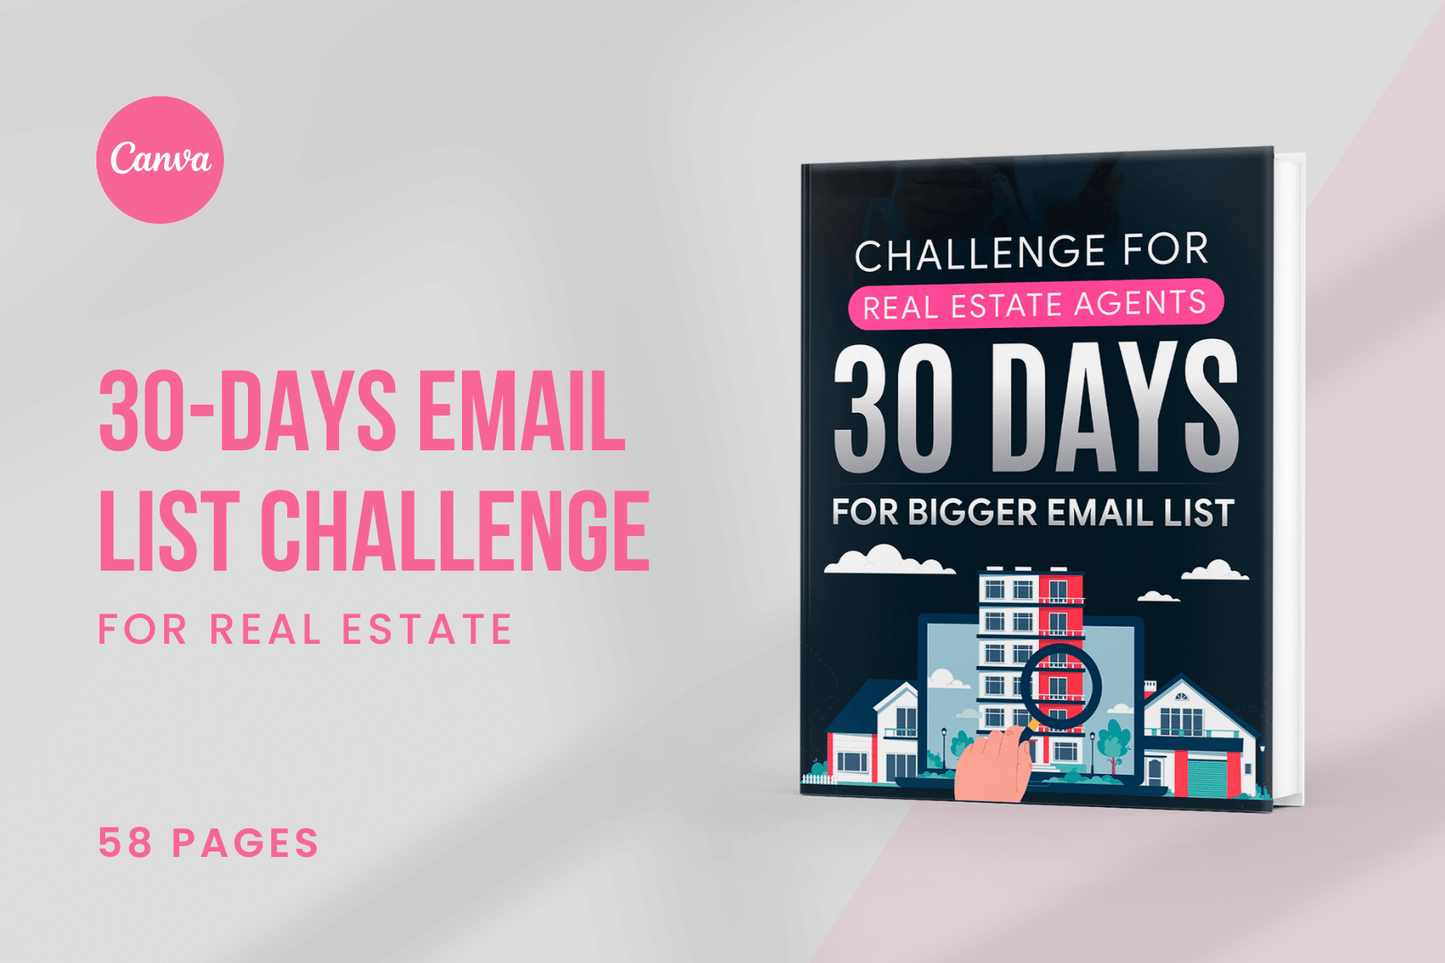 30-Days Email List Challenge for Real Estate